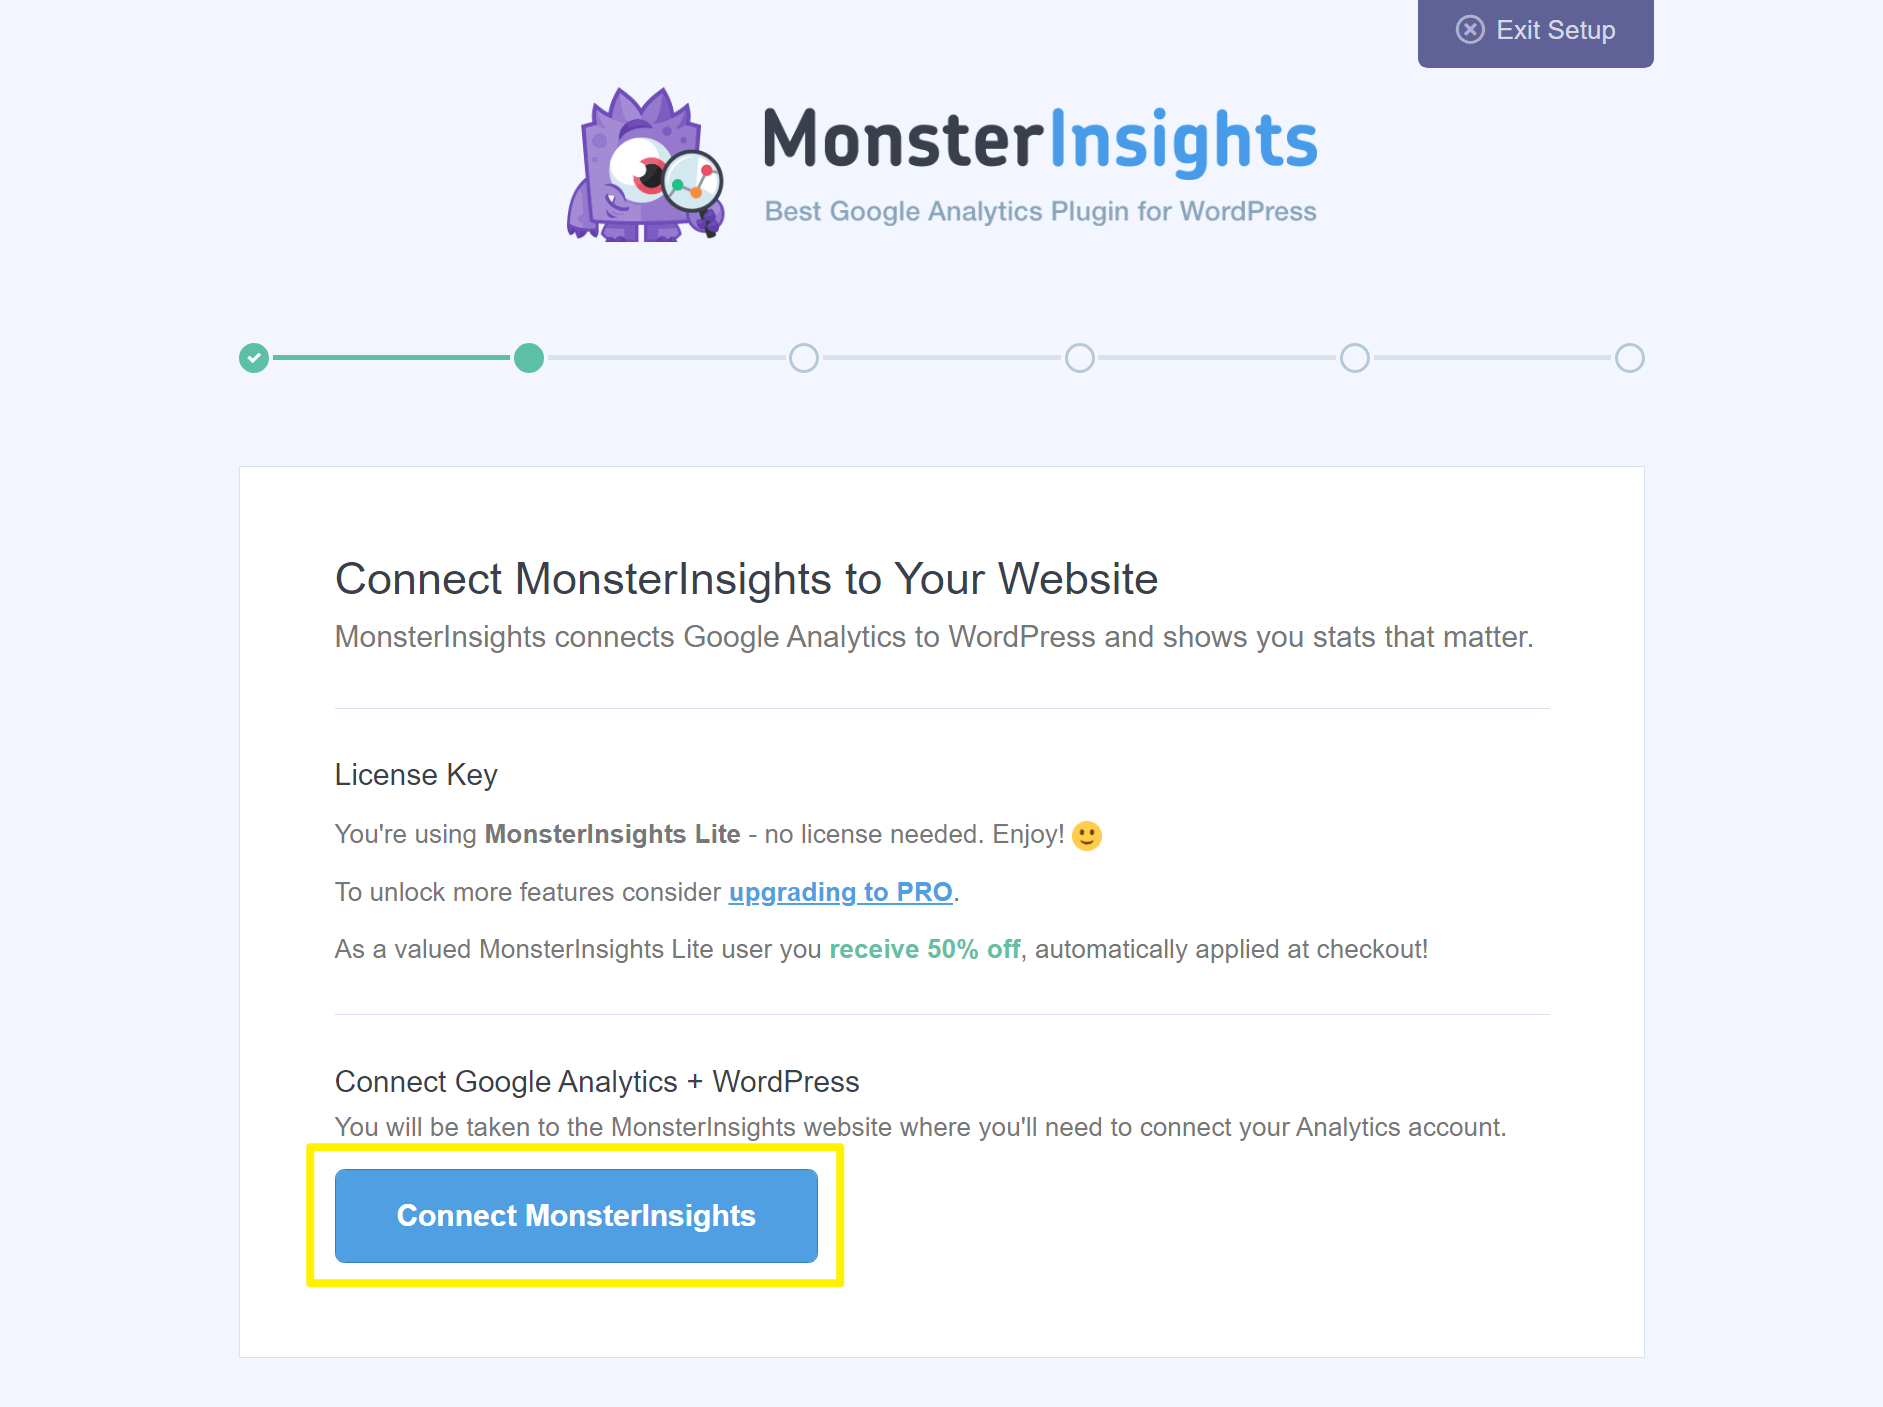 Connect MonsterInsights to set up Google Analytics in WordPress